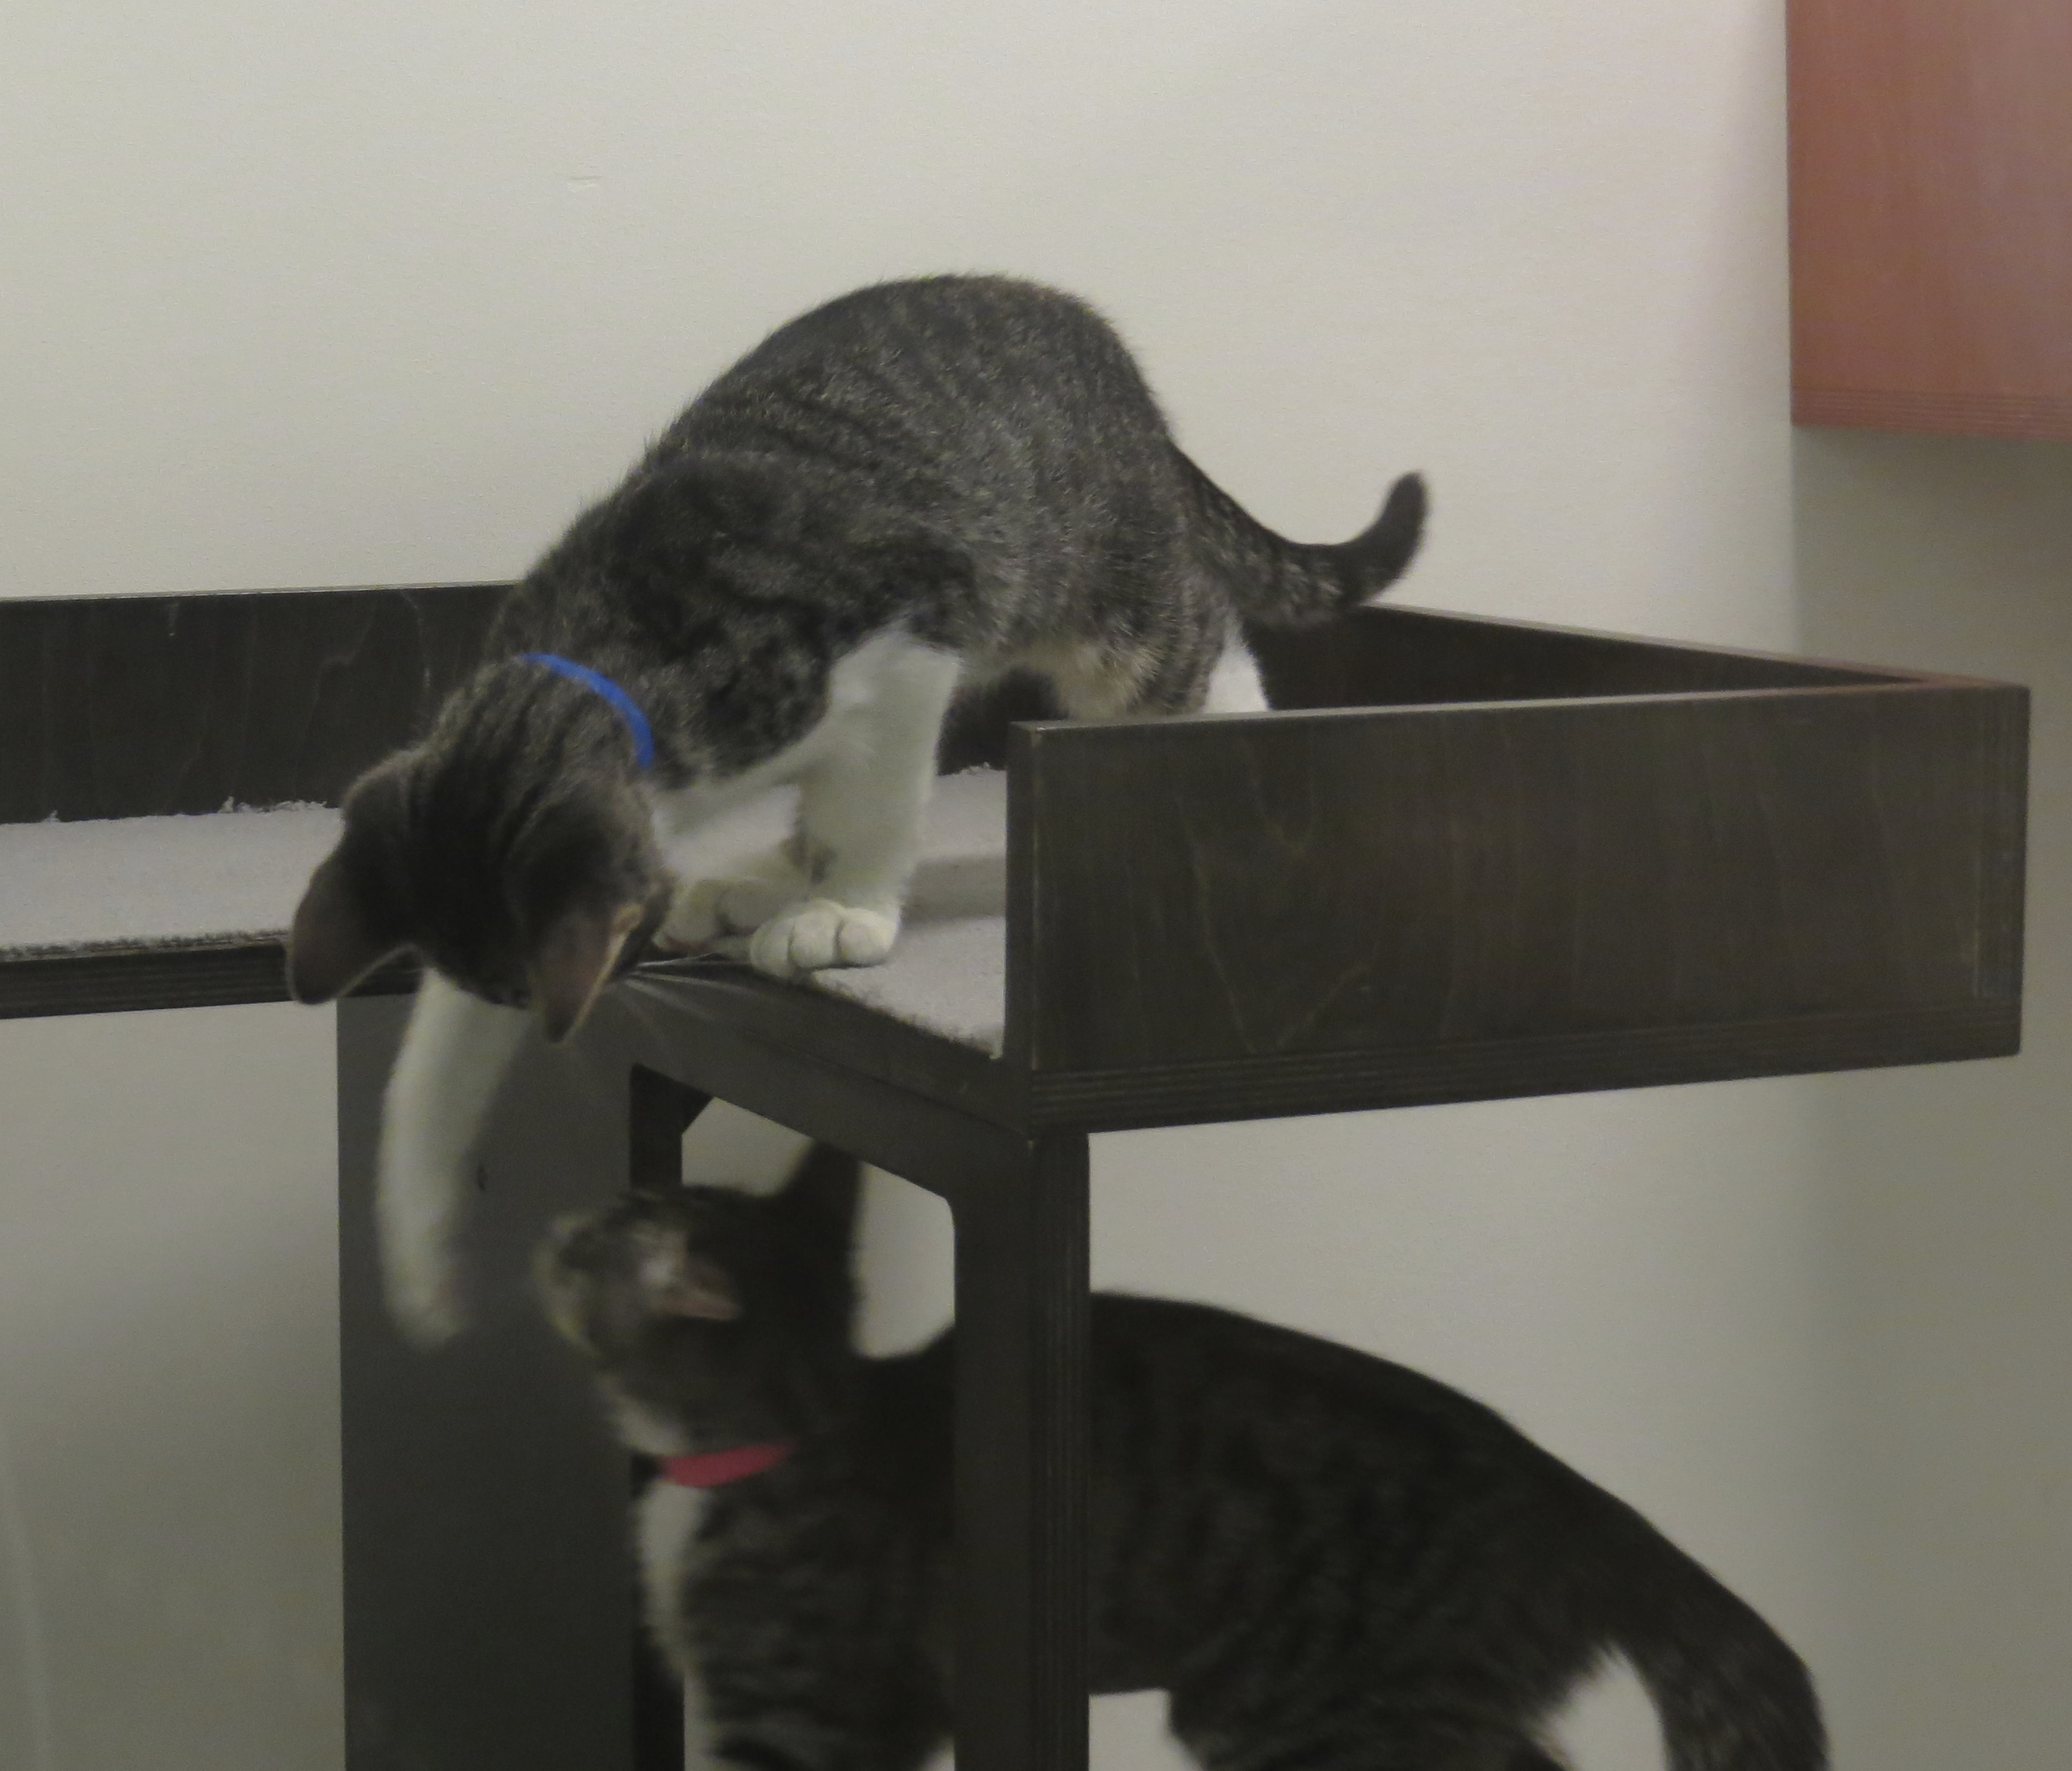 Two Grey Tiger Tabby Kittens Playing